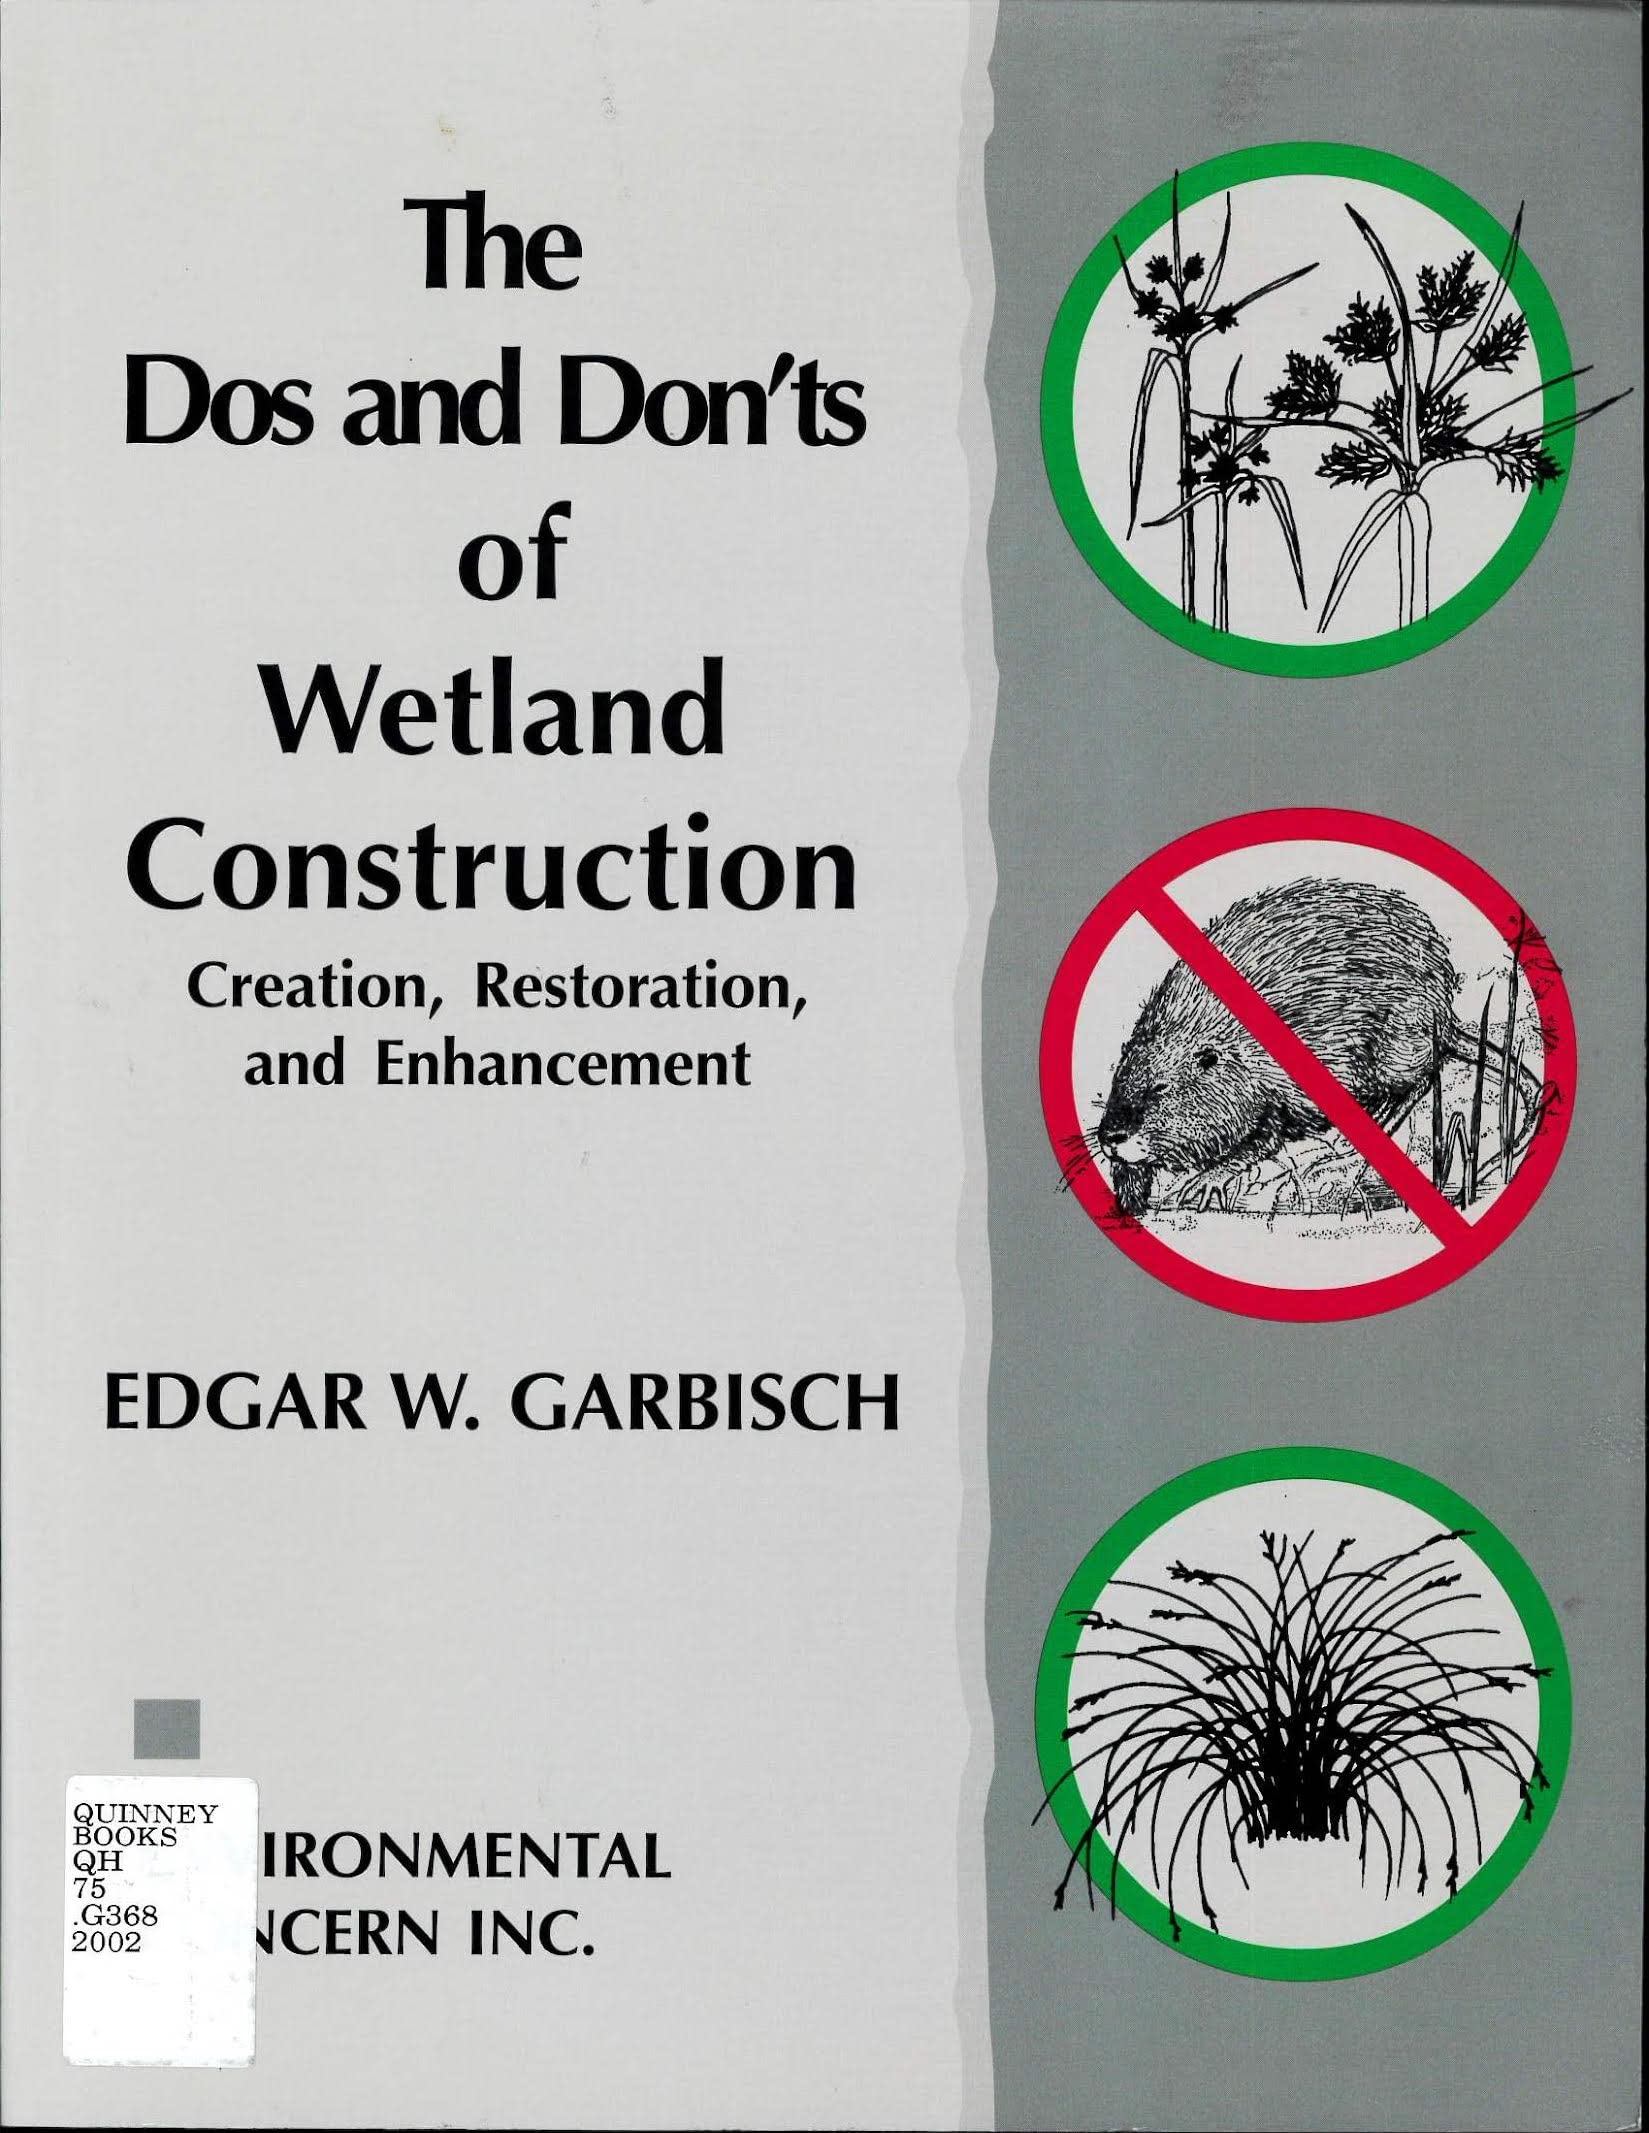 the do's and don'ts of wetland construction